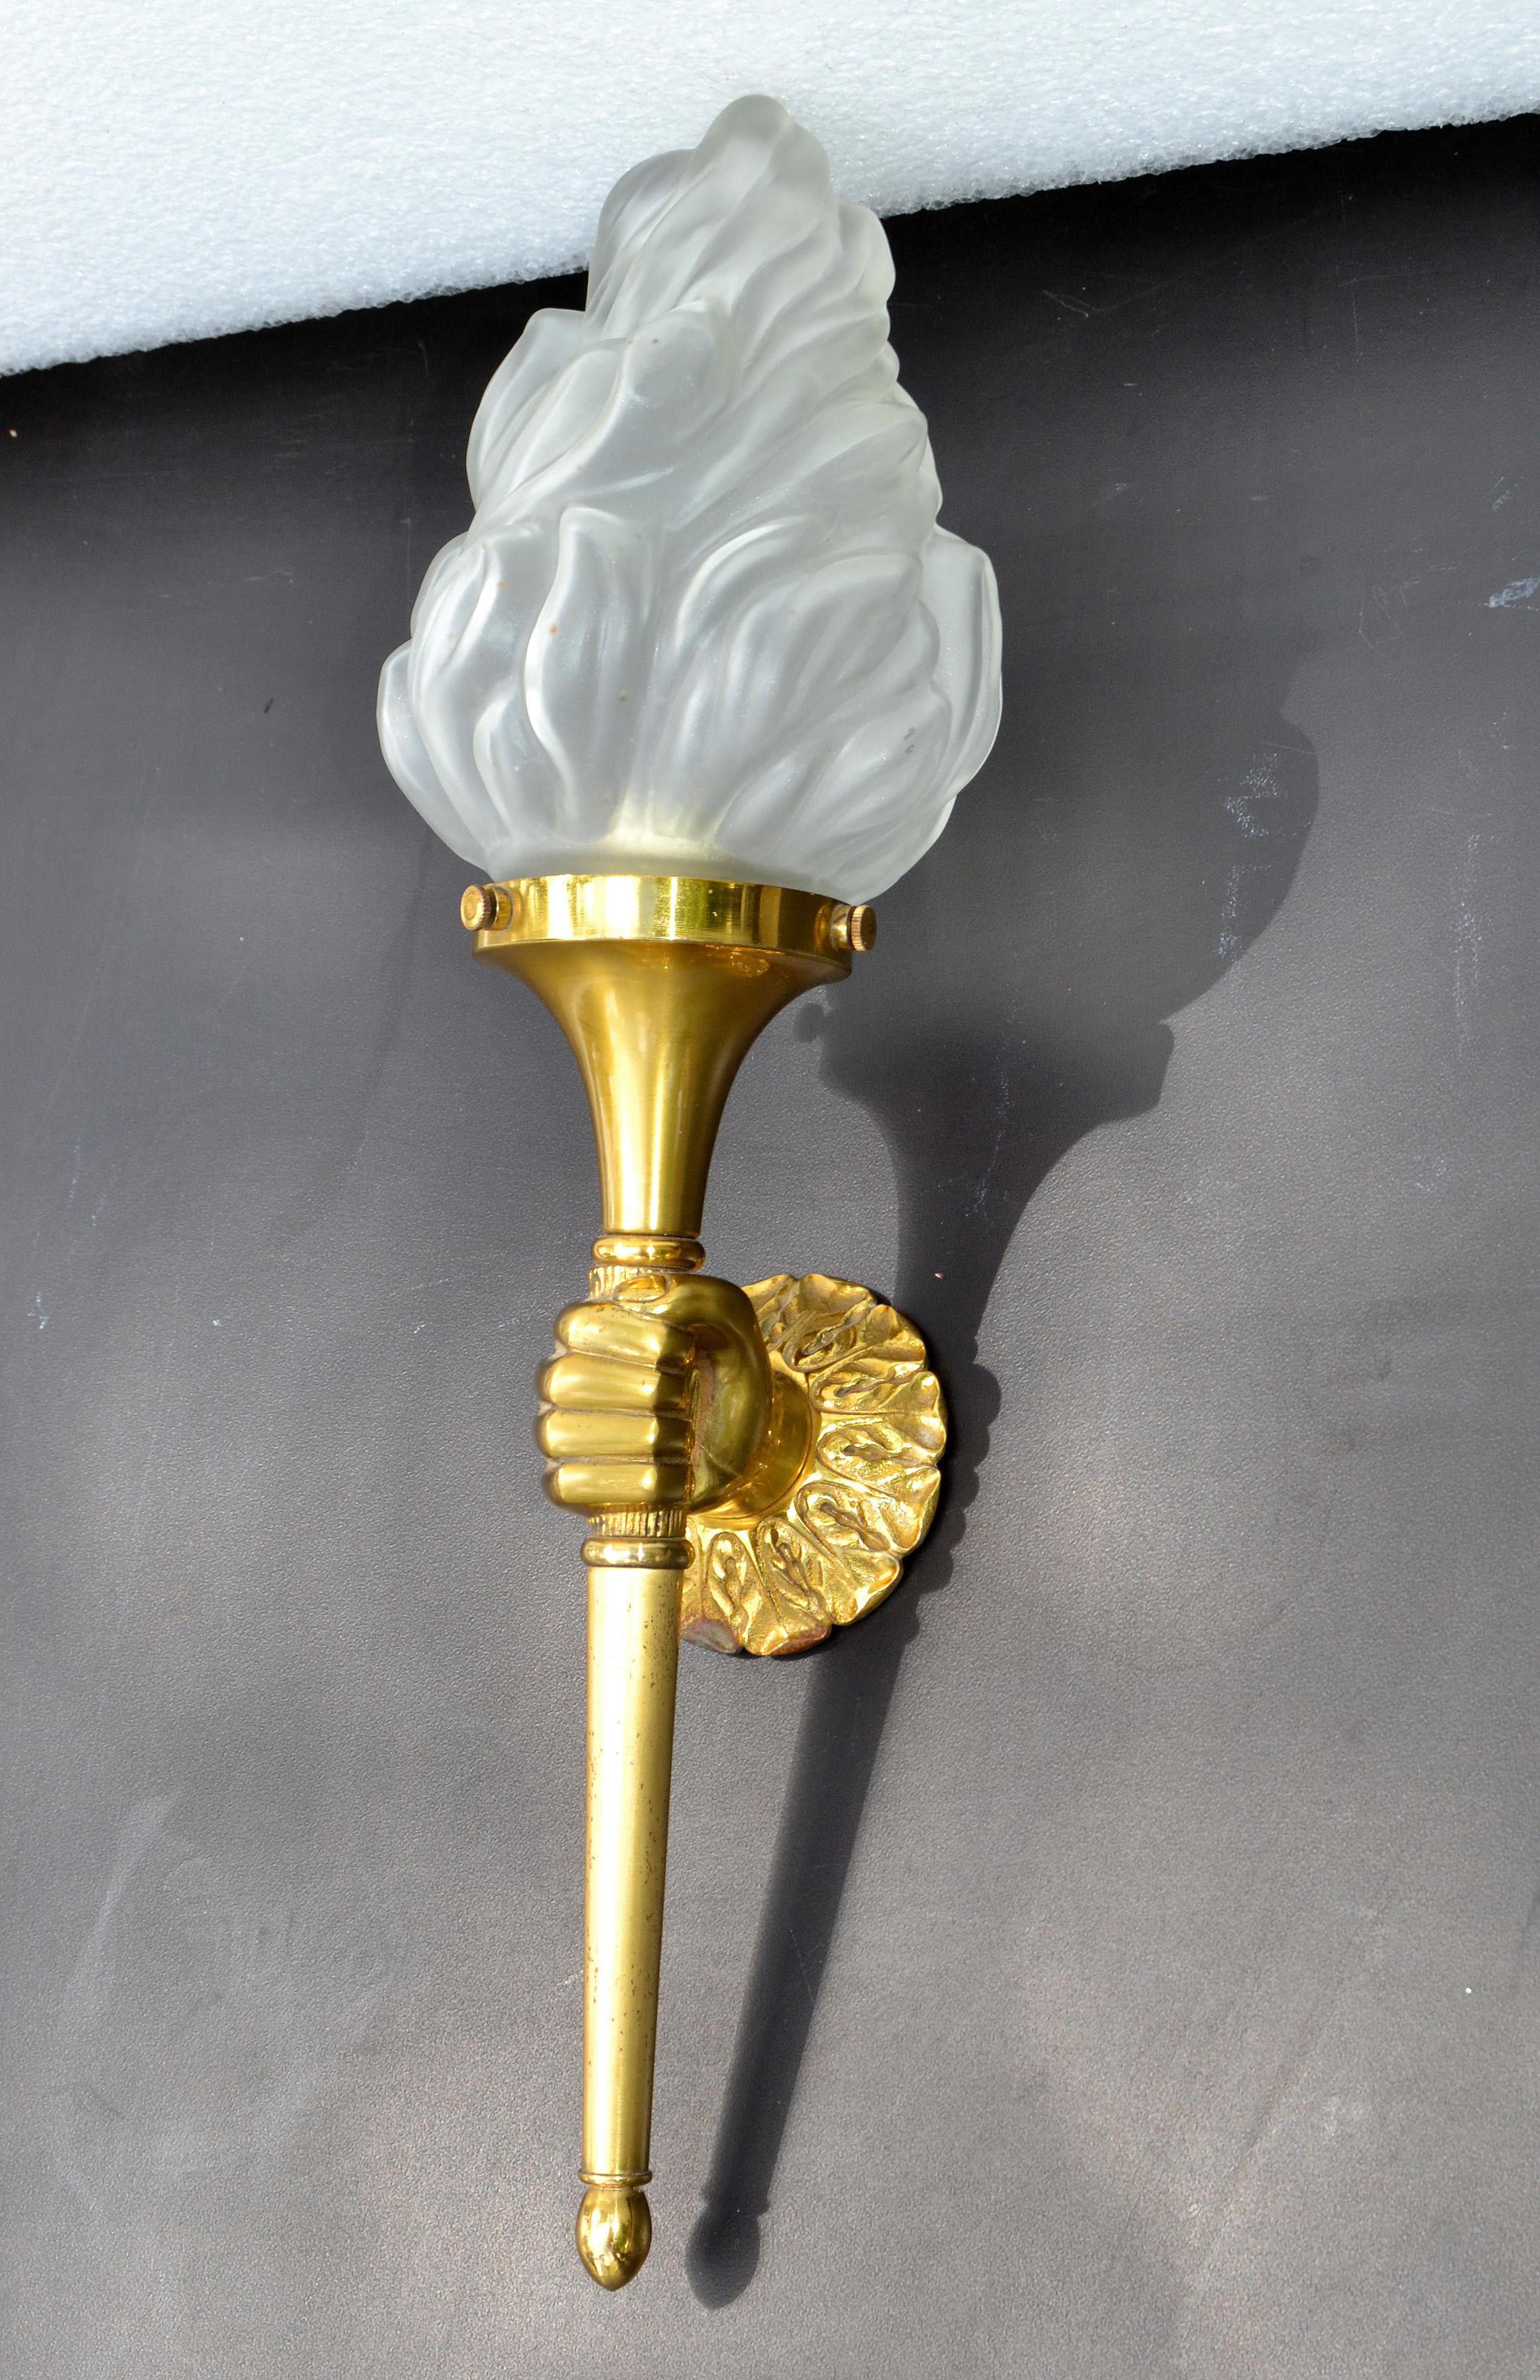 Maison Arlus Bronze Sconce Hand Holding Torch & Flame Glass Shade France, Pair In Good Condition For Sale In Miami, FL